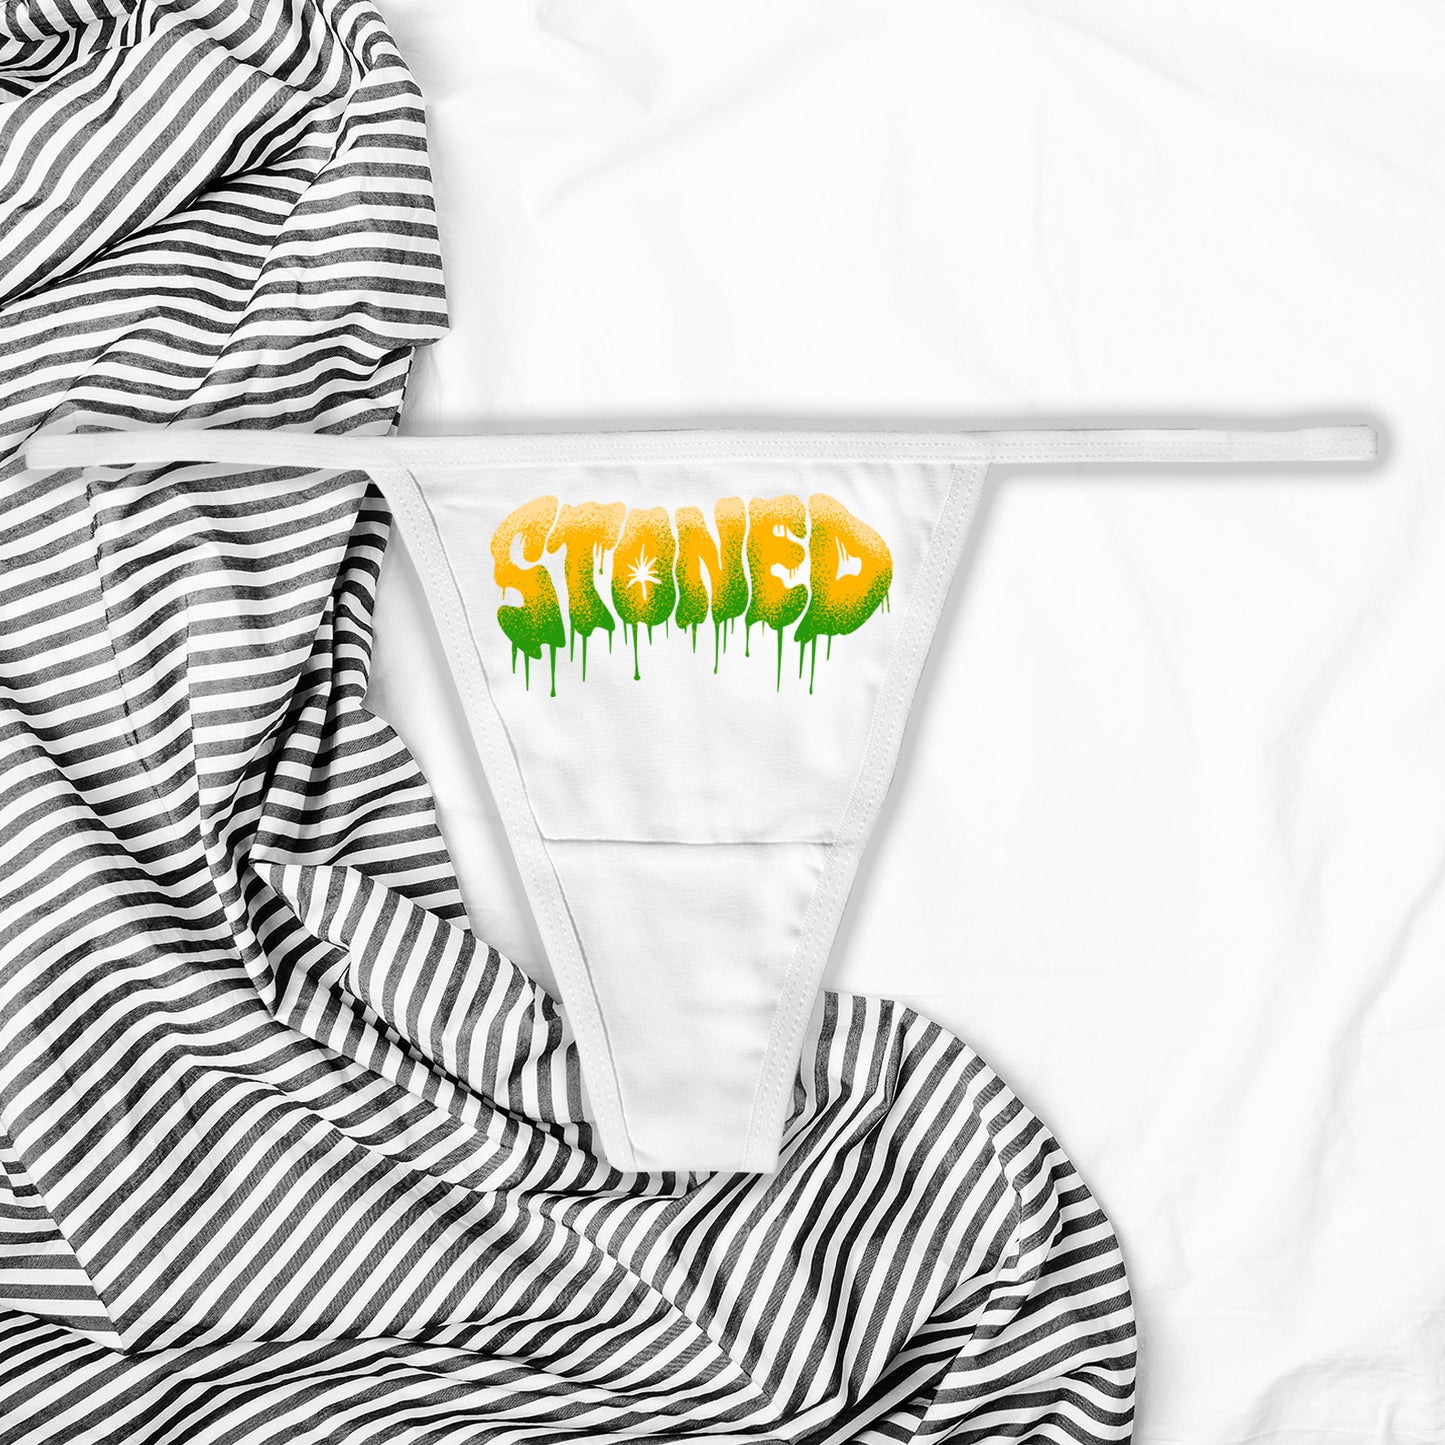 Stoned Thong